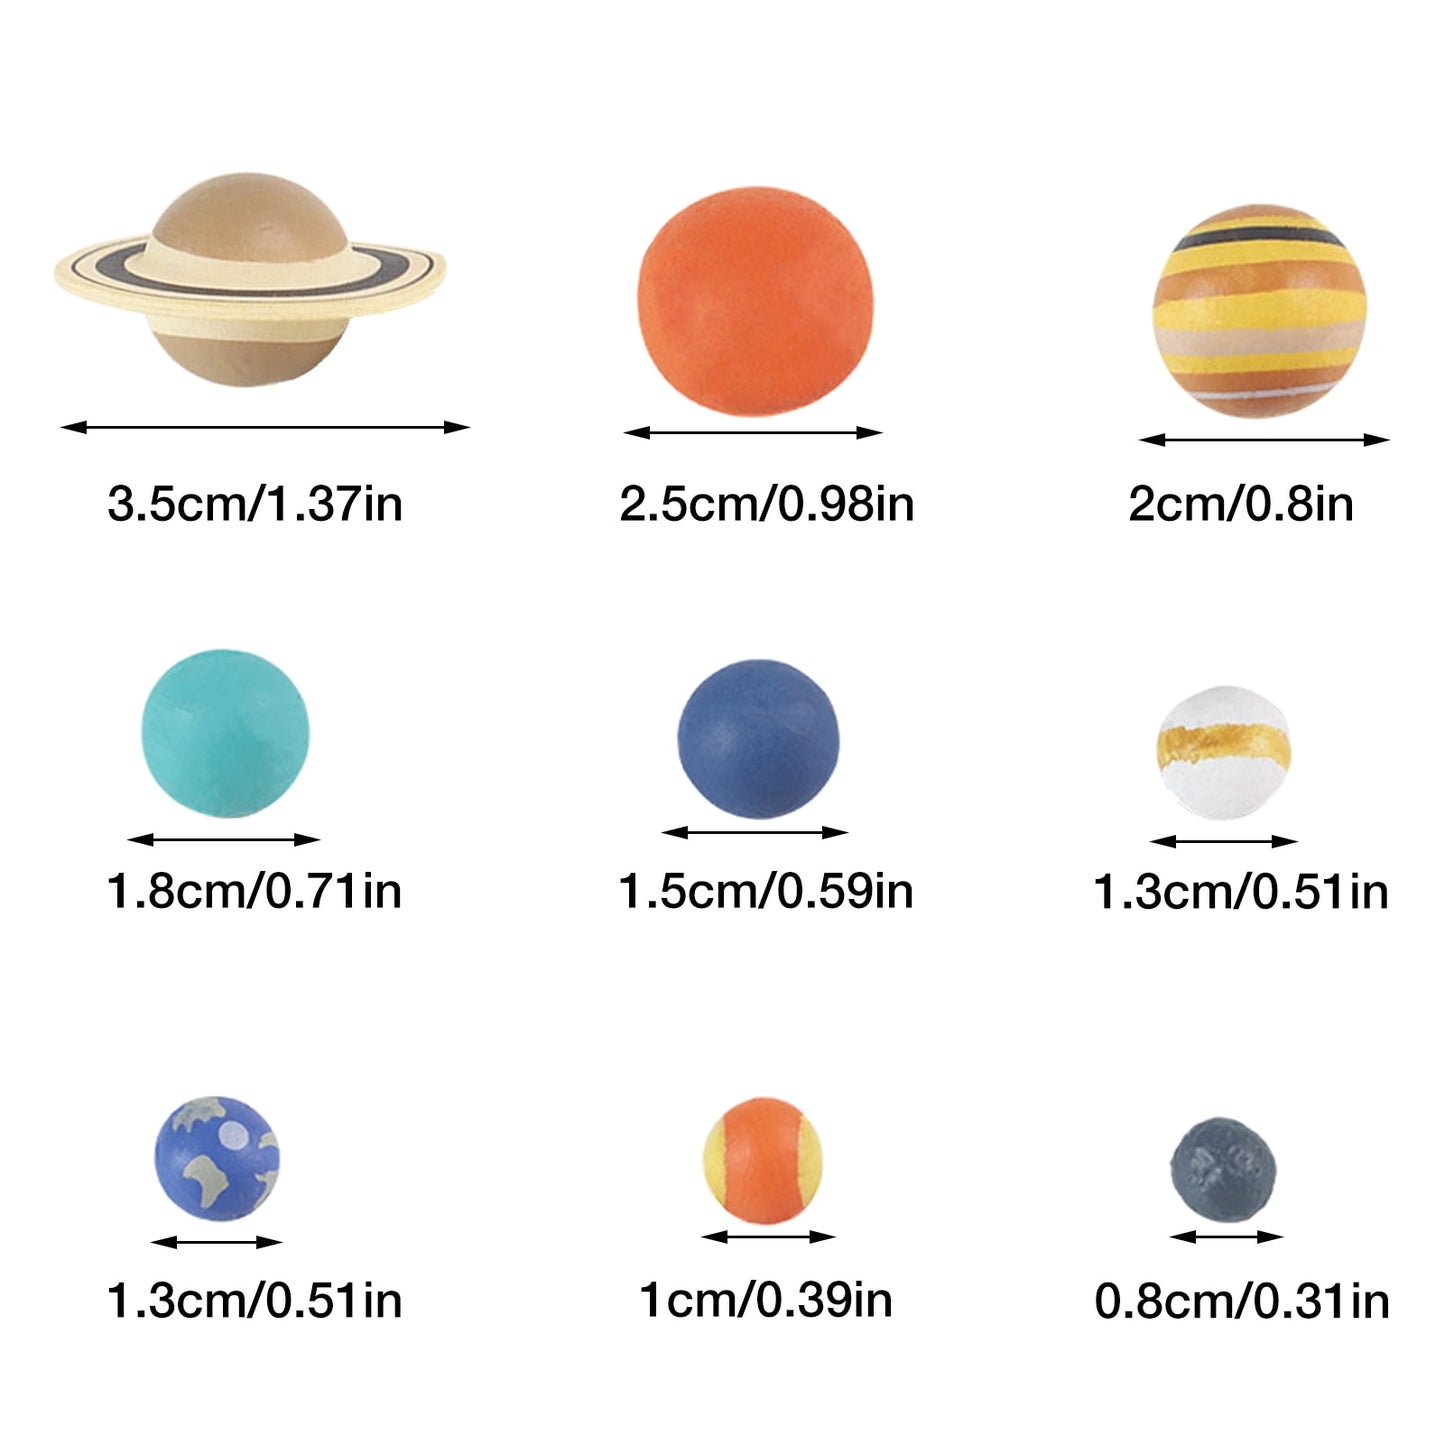 Scale Model Solar System: Planets and Sun (Set of 9)